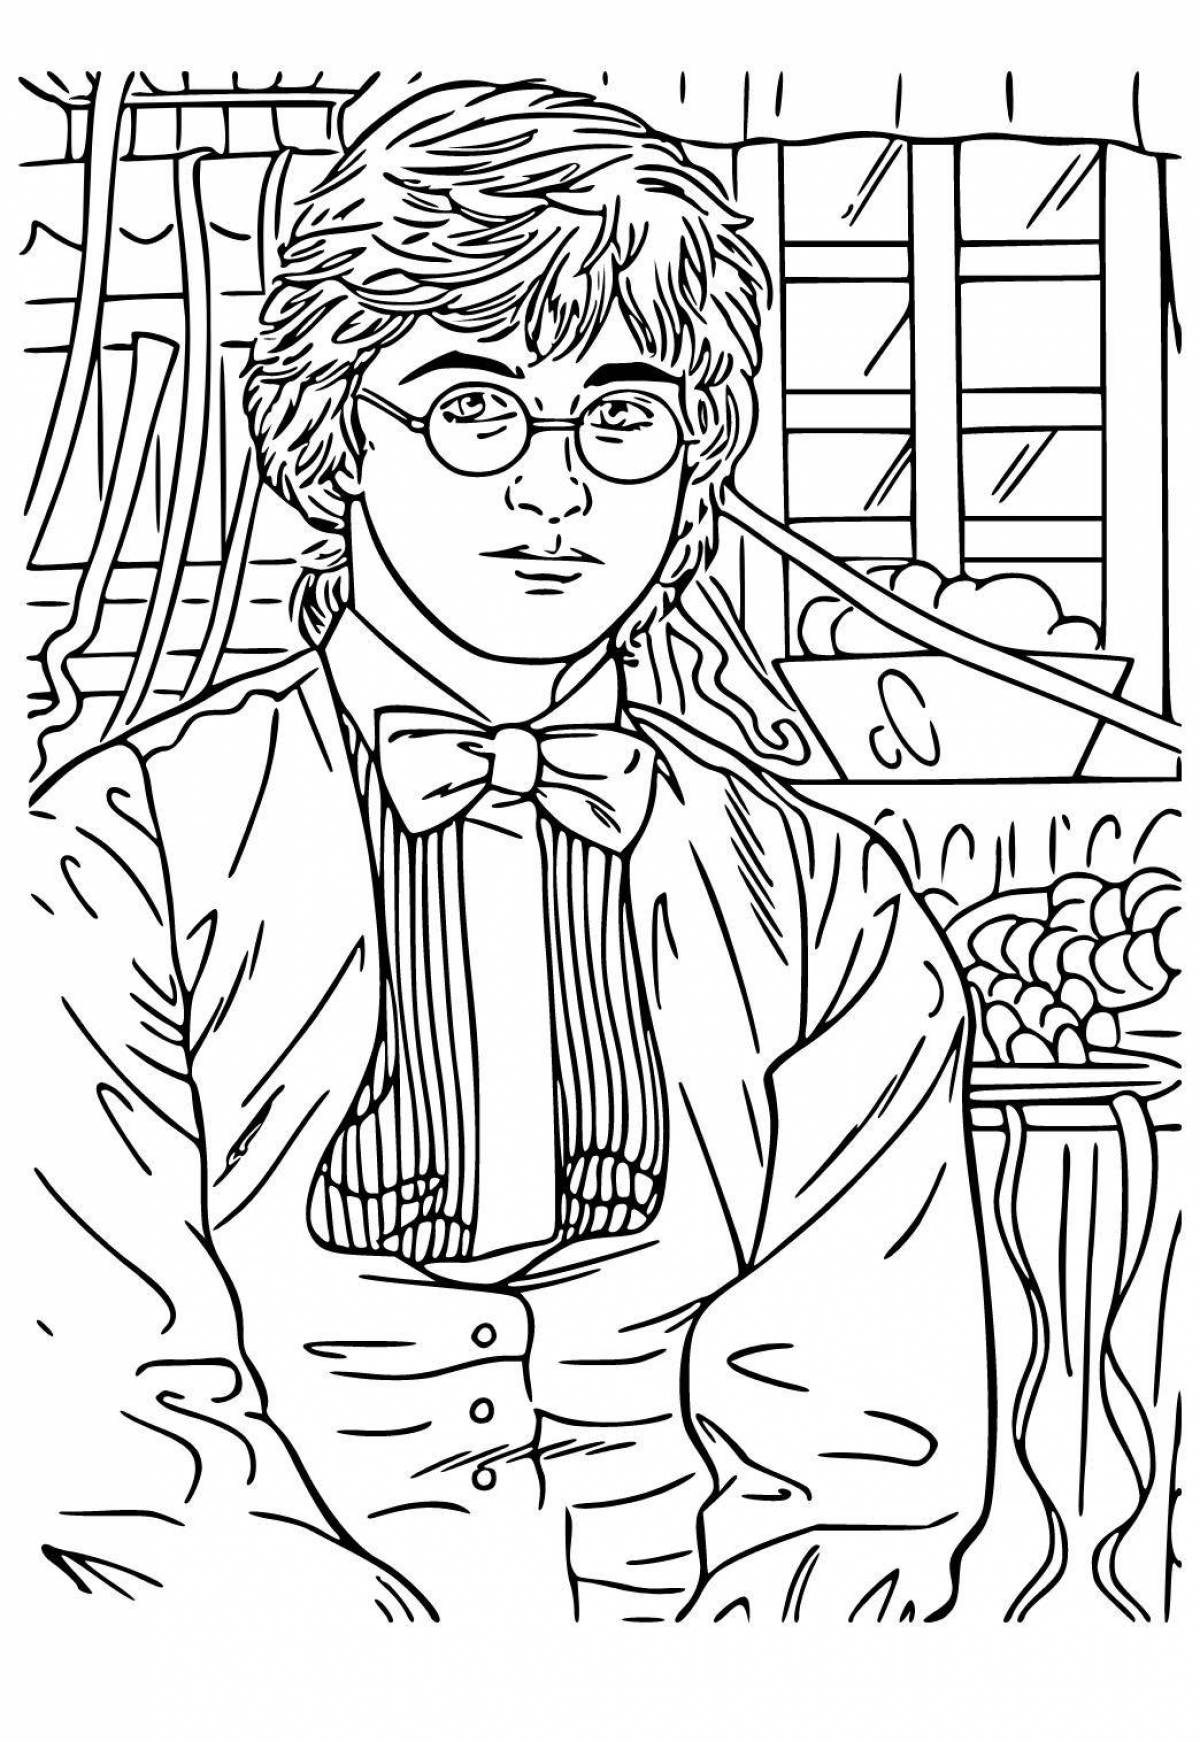 Harry potter anime glitter coloring book